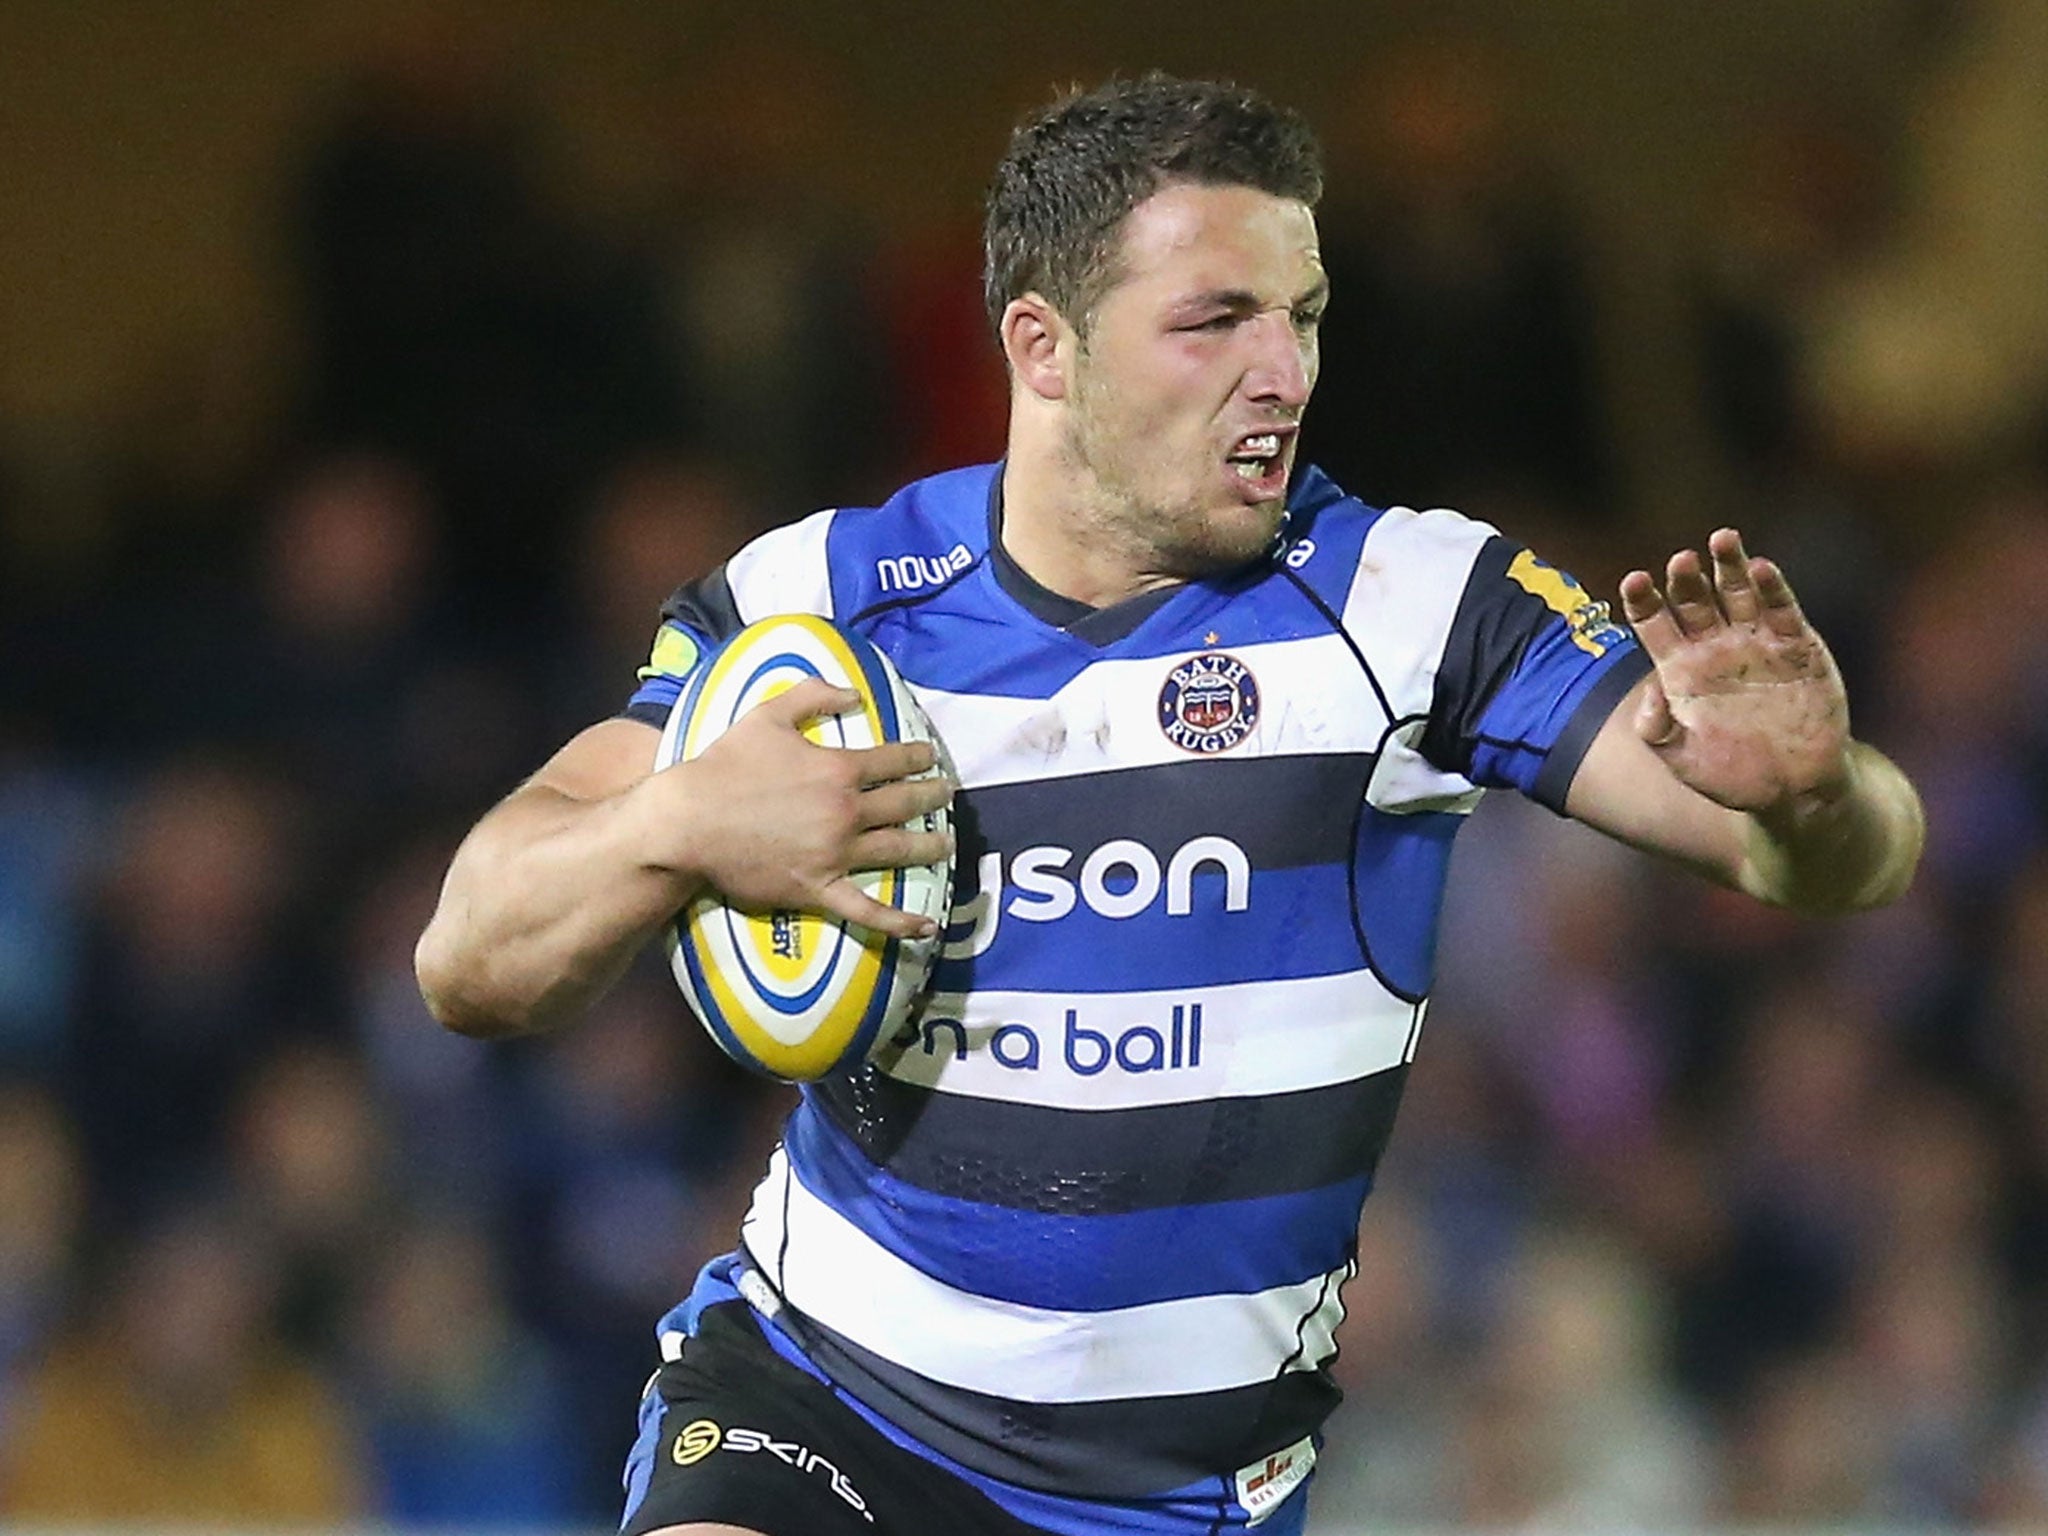 League convert Sam Burgess in action for Bath against London Irish last month in his new role as a back-row forward